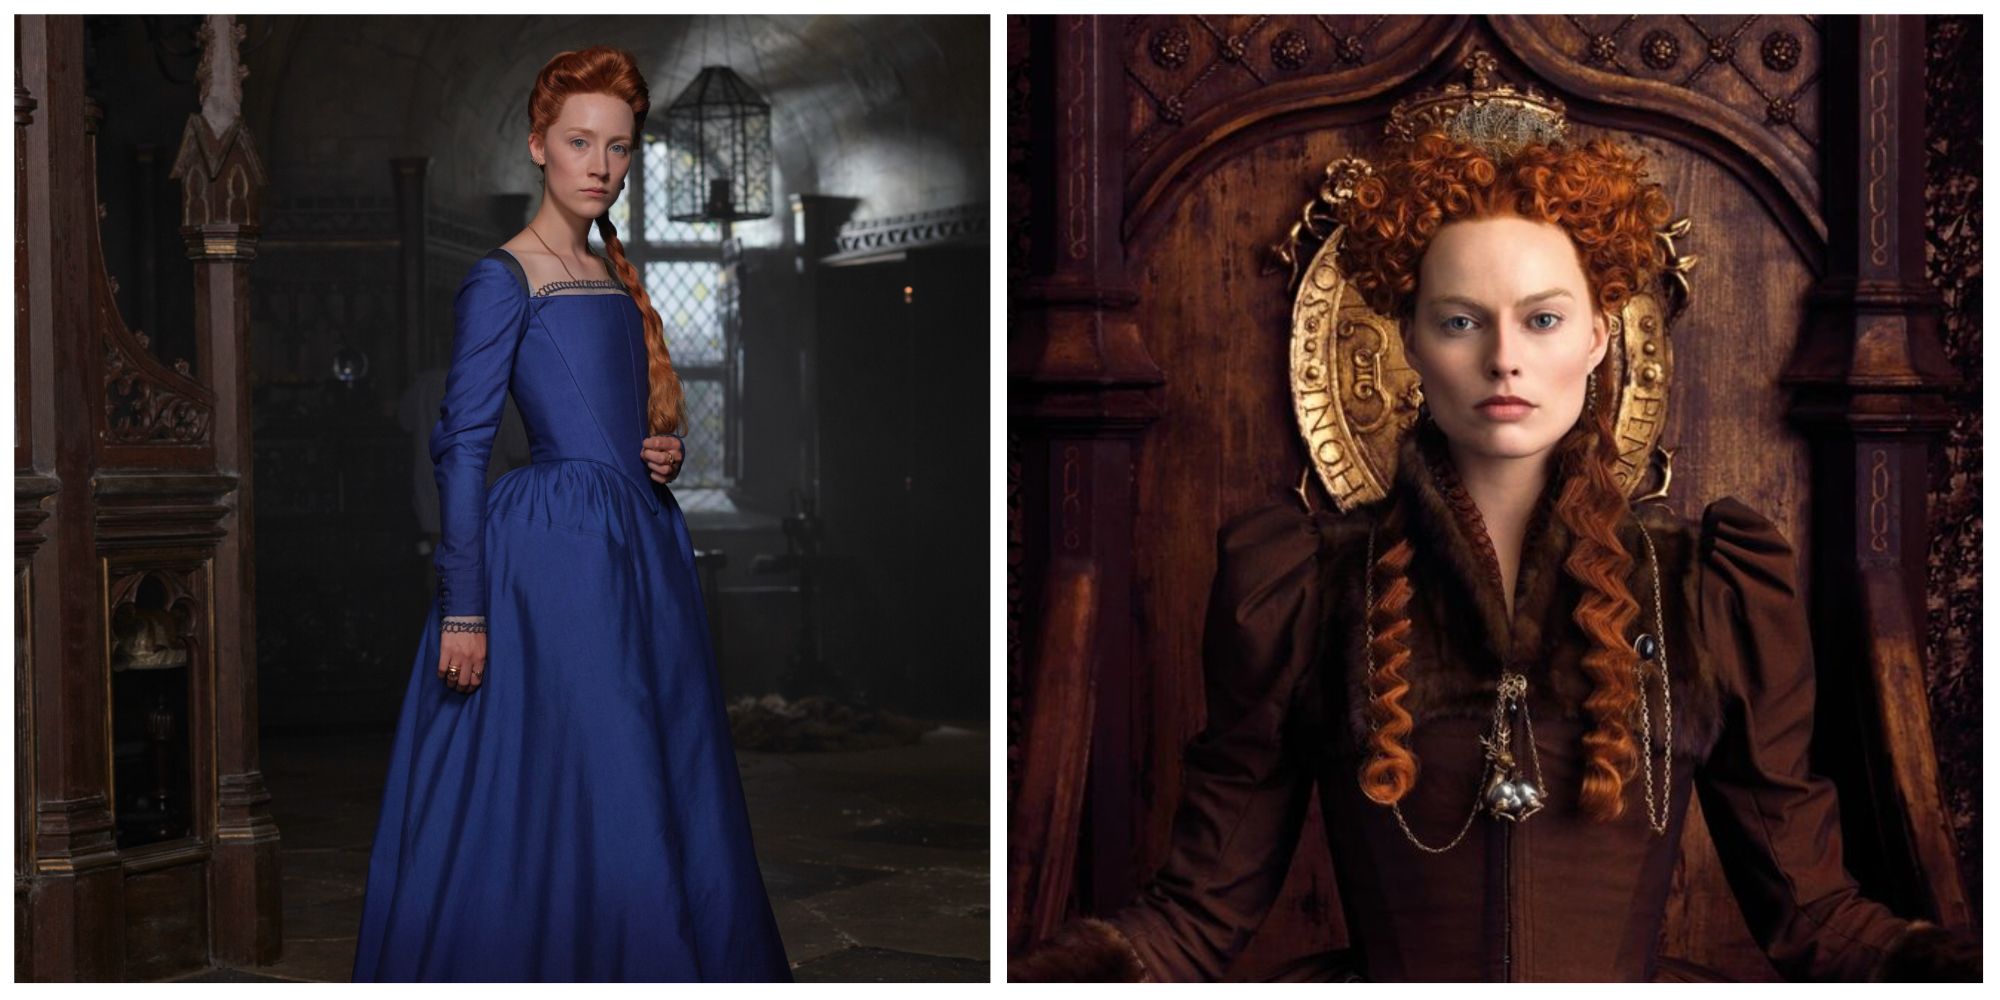 Left: Saoirse Ronan as Mary Queen of Scots. Right: Margot Robbie as Queen Elizabeth.